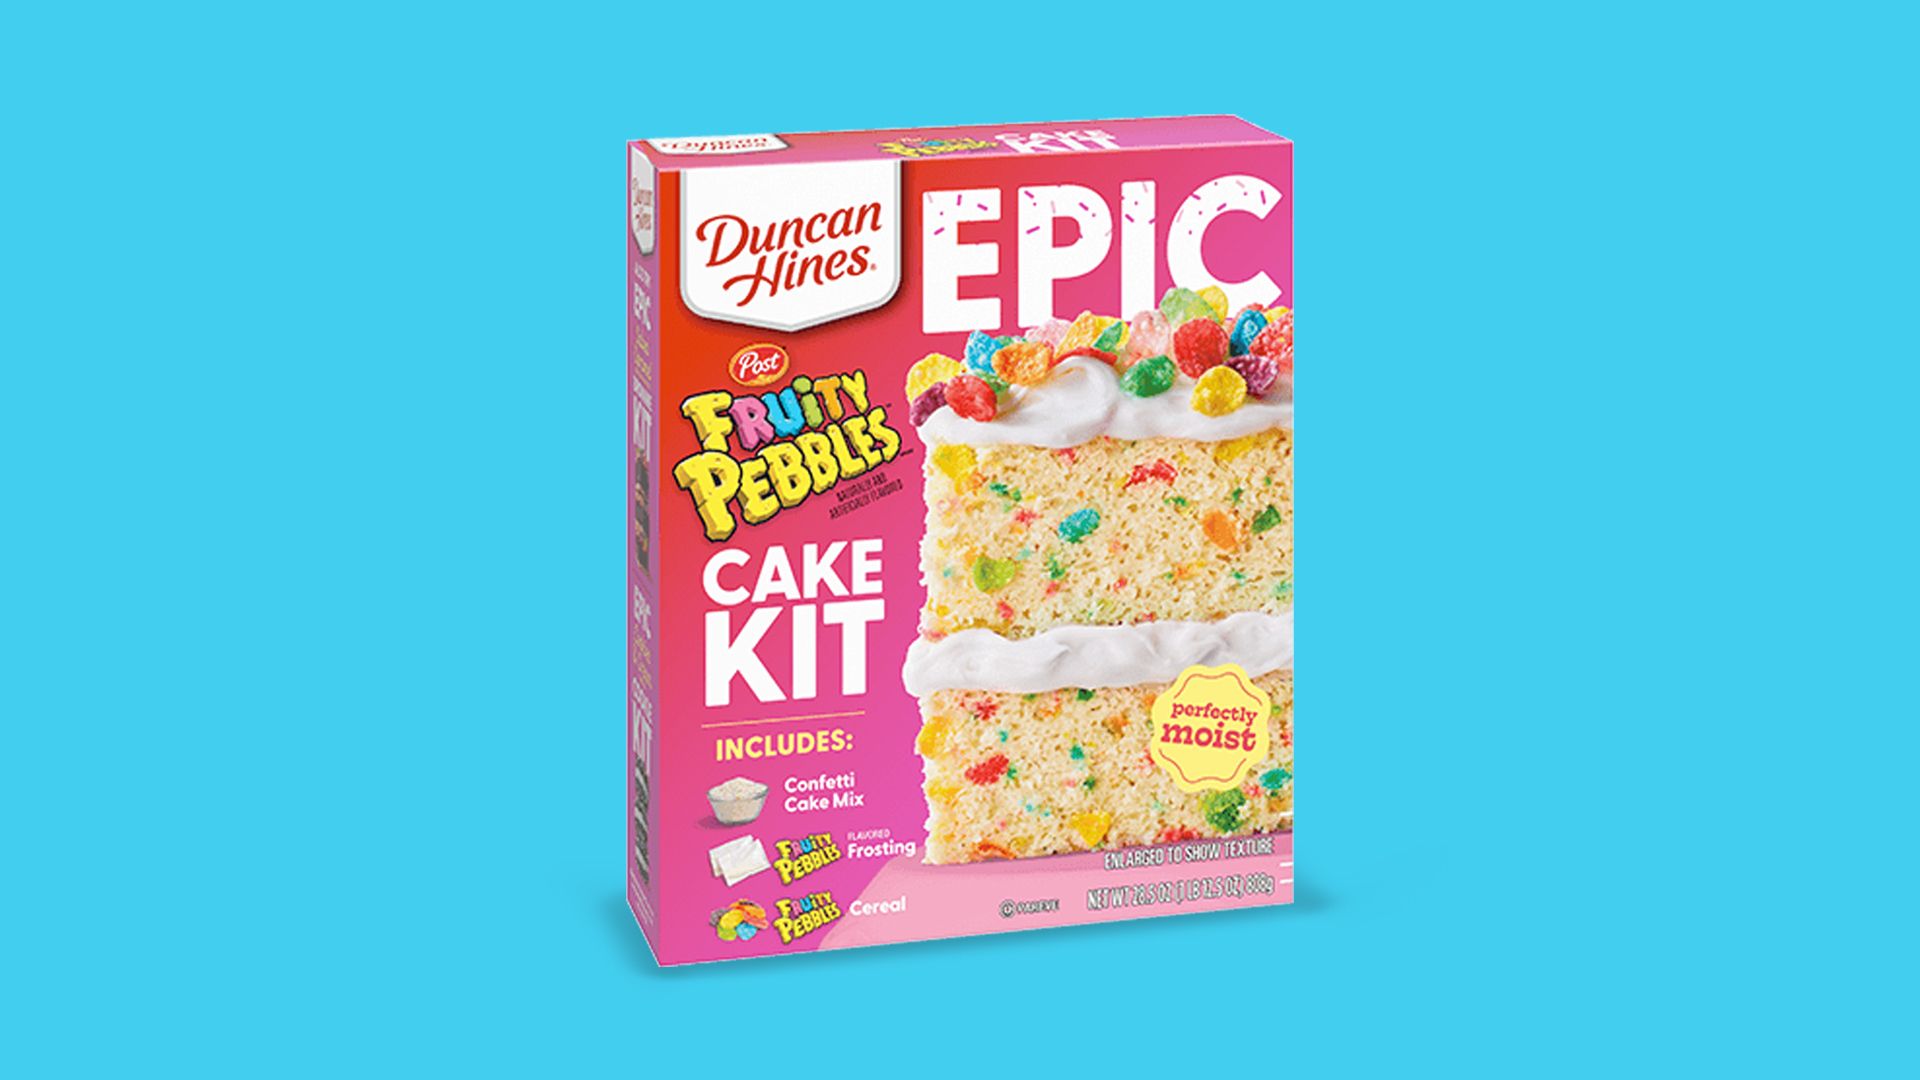 A box of Duncan Hines cake mix that features confetti cake and Fruity Pebbles frosting.